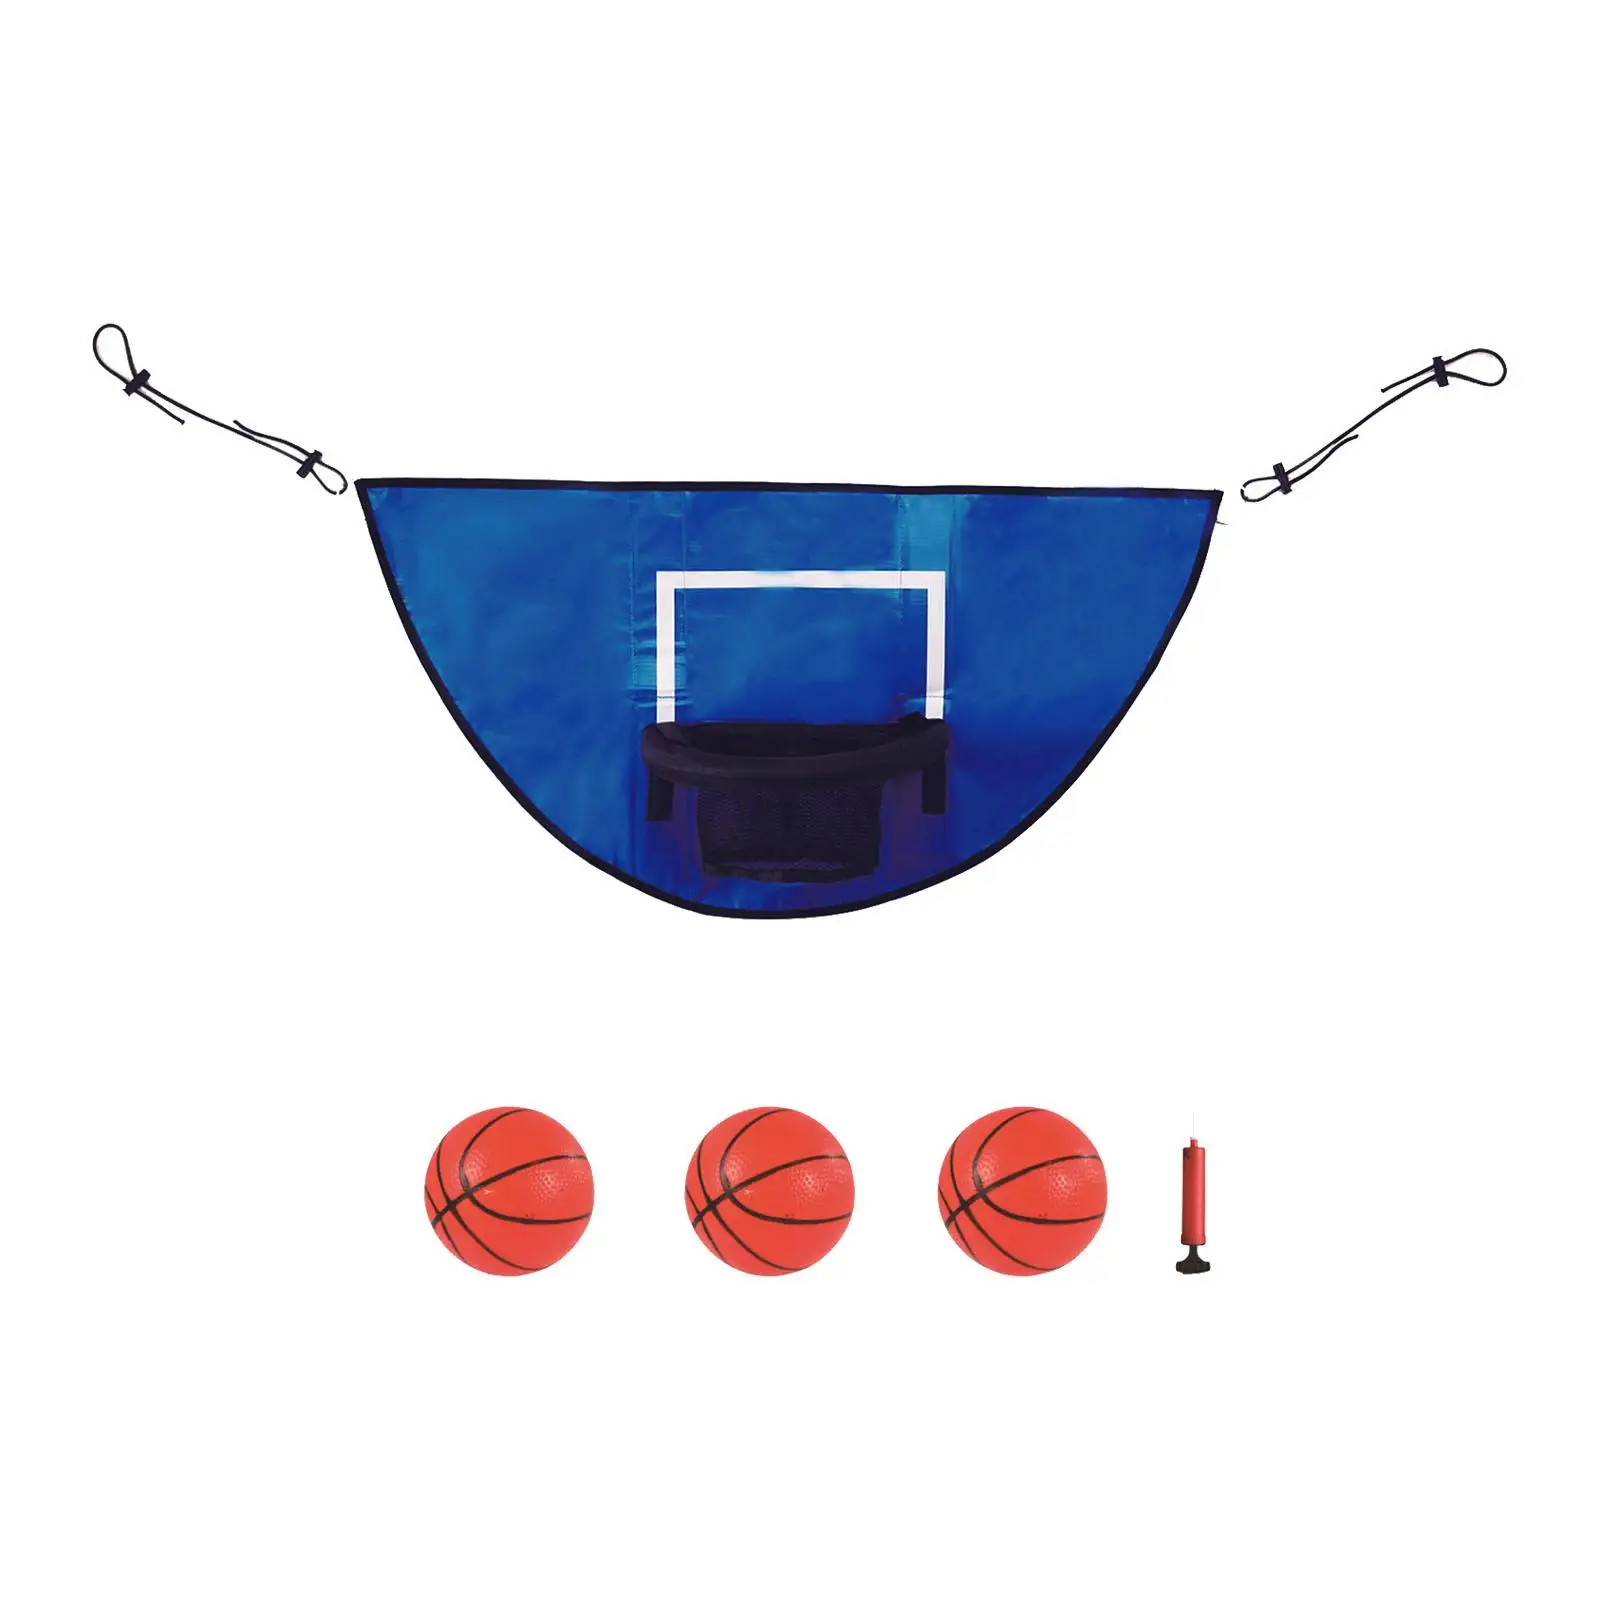 Mini Trampoline Basketball Hoop with Basketball and Pump Durable for Kids Adults Waterproof Materials Kids Basketball Stand